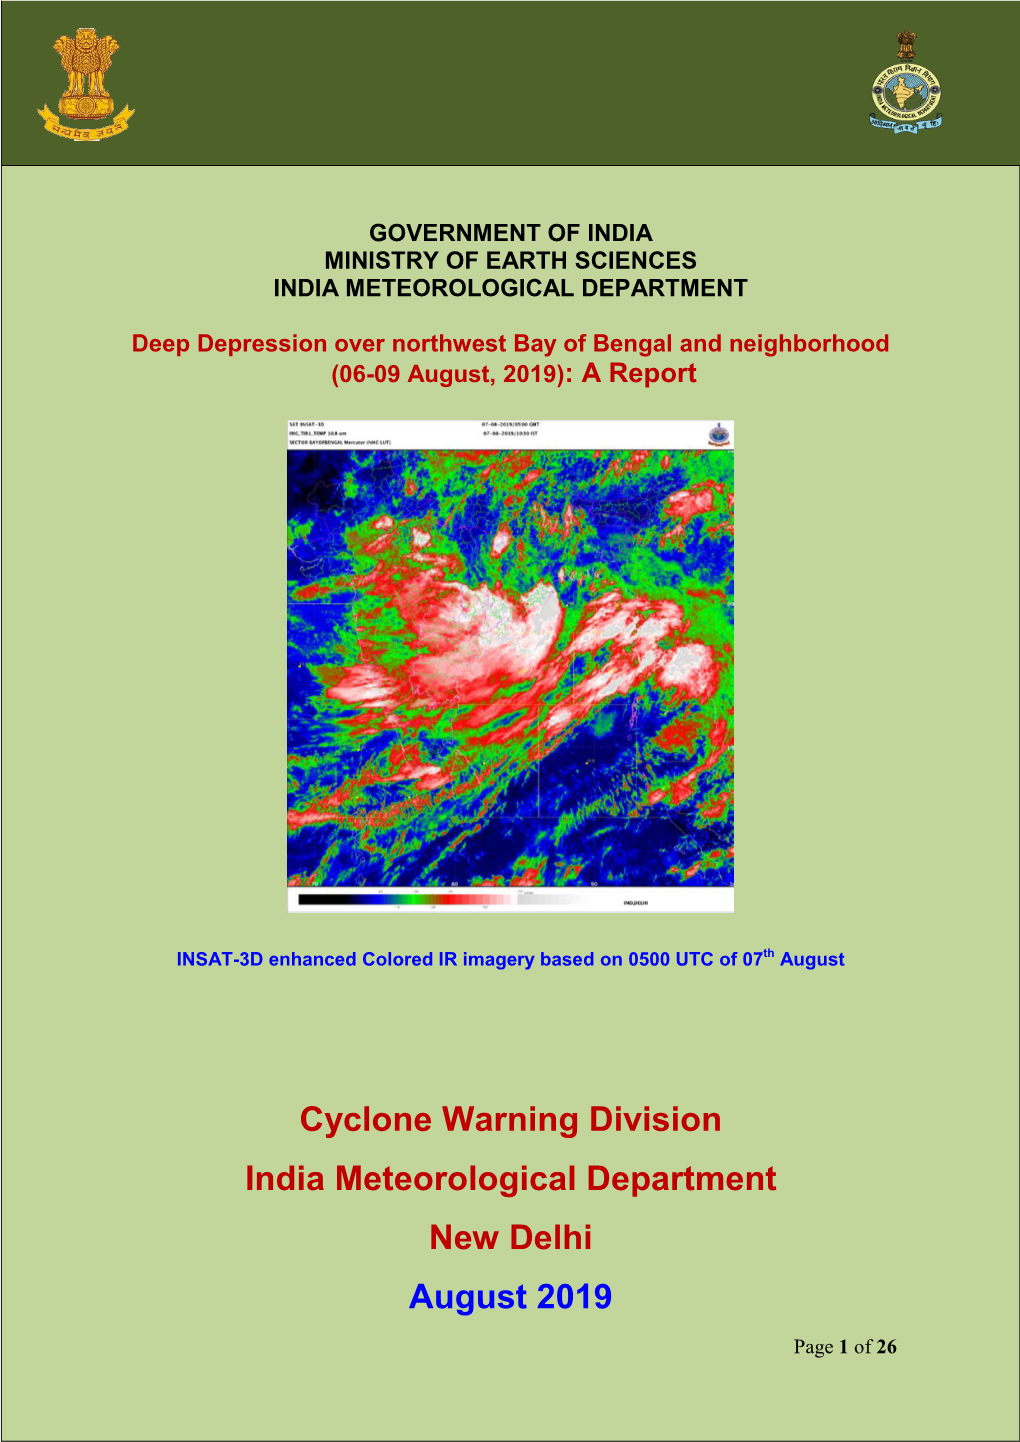 Cyclone Warning Division India Meteorological Department New Delhi August 2019 Page 1 of 26